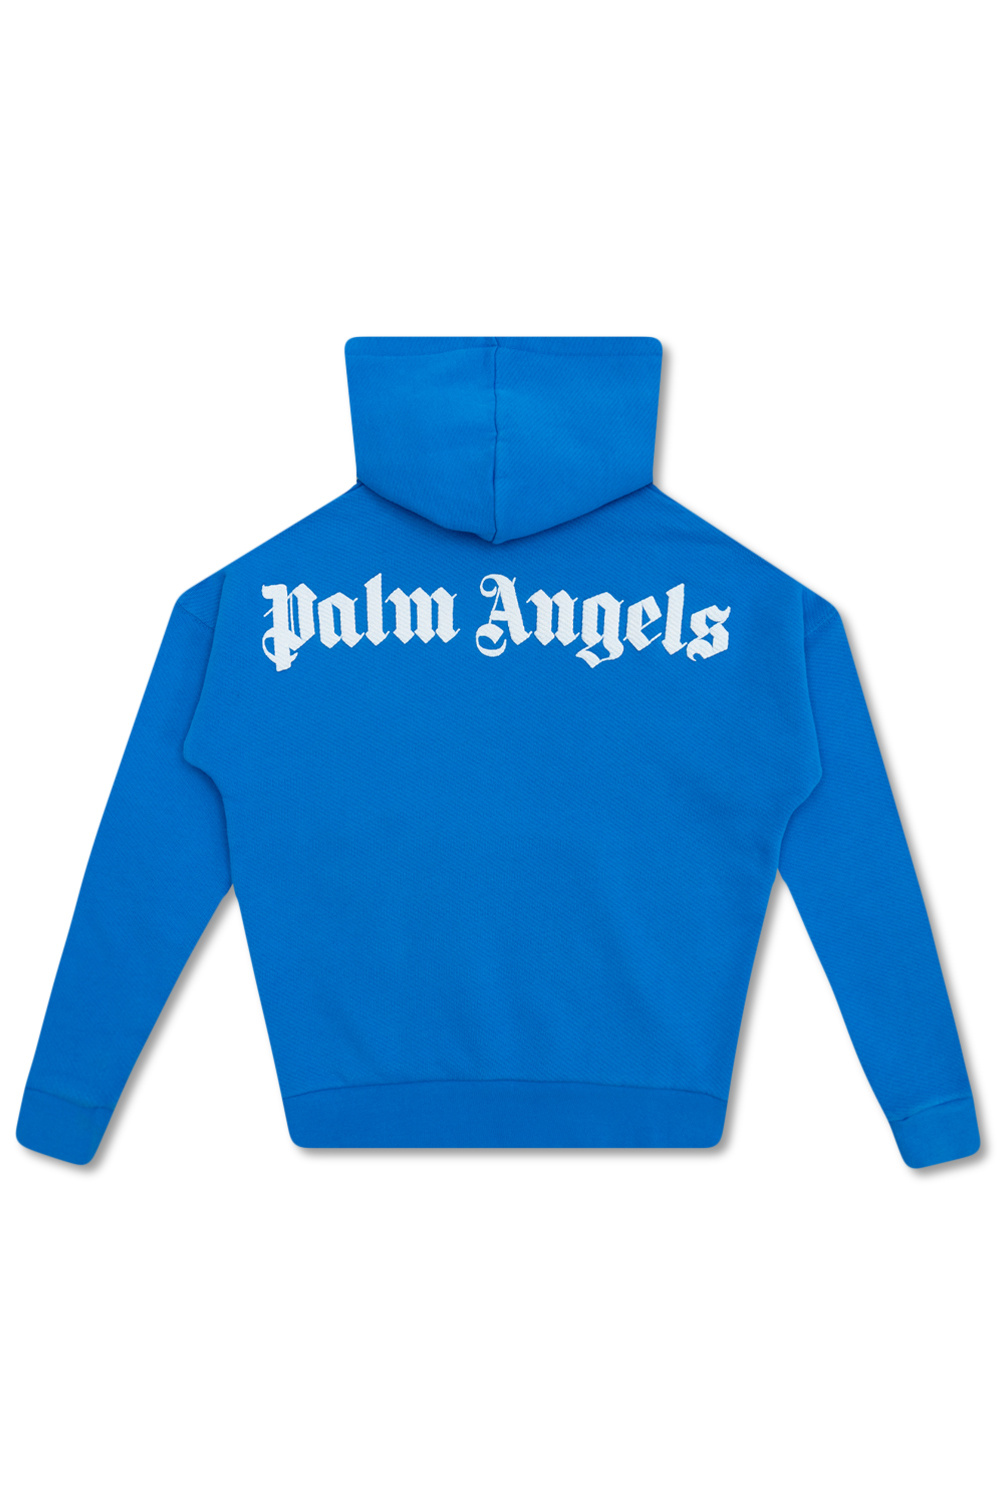 Palm Angels Kids for the spring-summer season